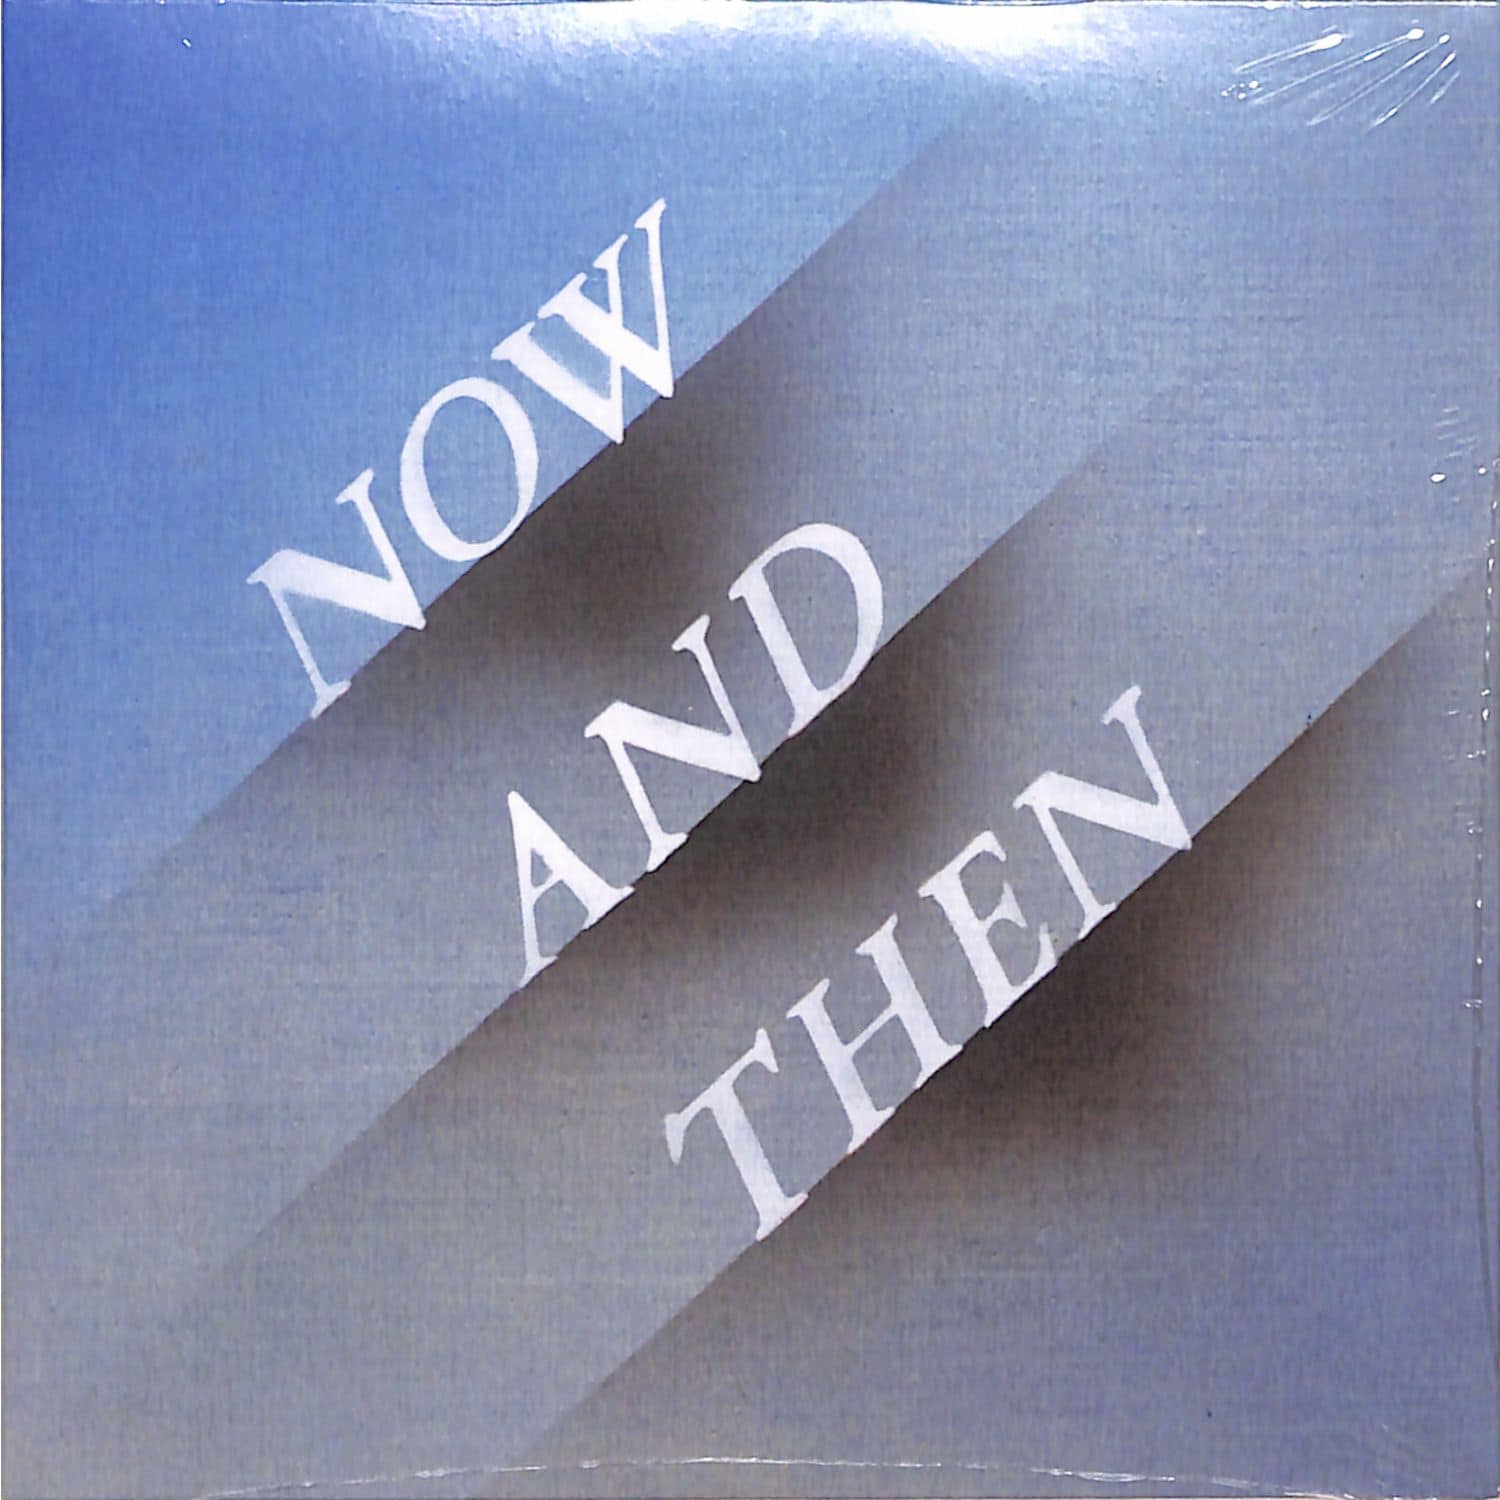 The Beatles - NOW & THEN 